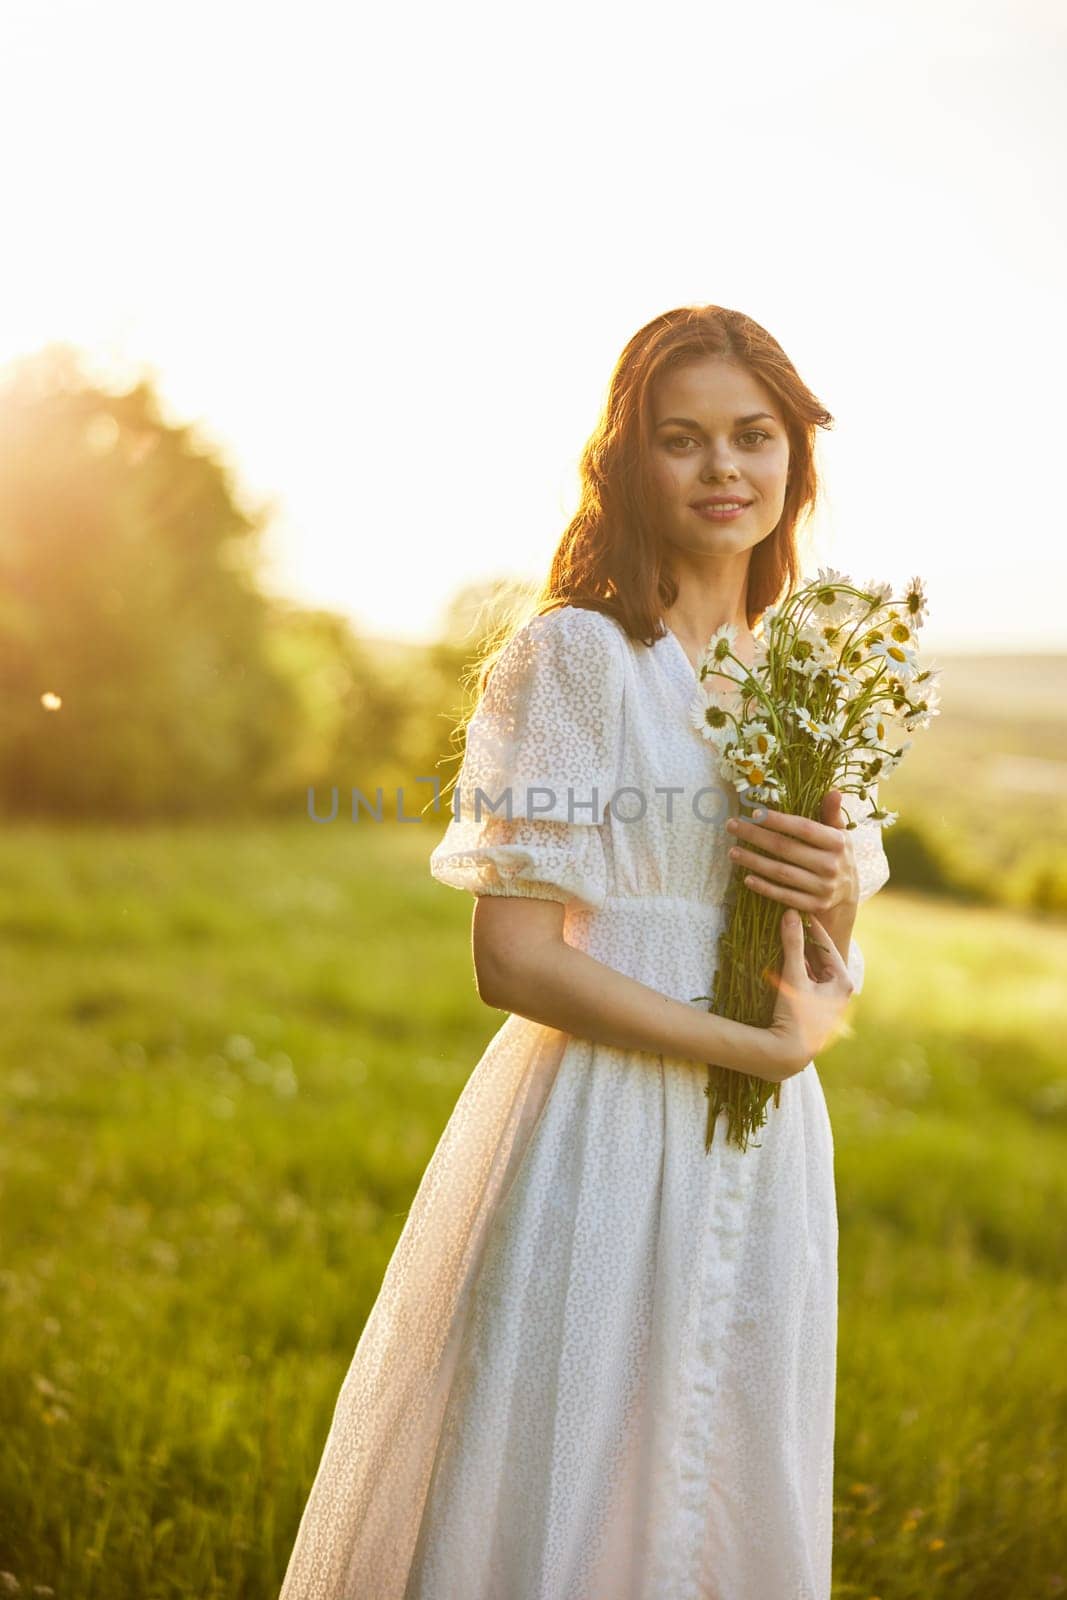 portrait of a woman in a light dress in a field during sunset with a bouquet of daisies in her hands by Vichizh